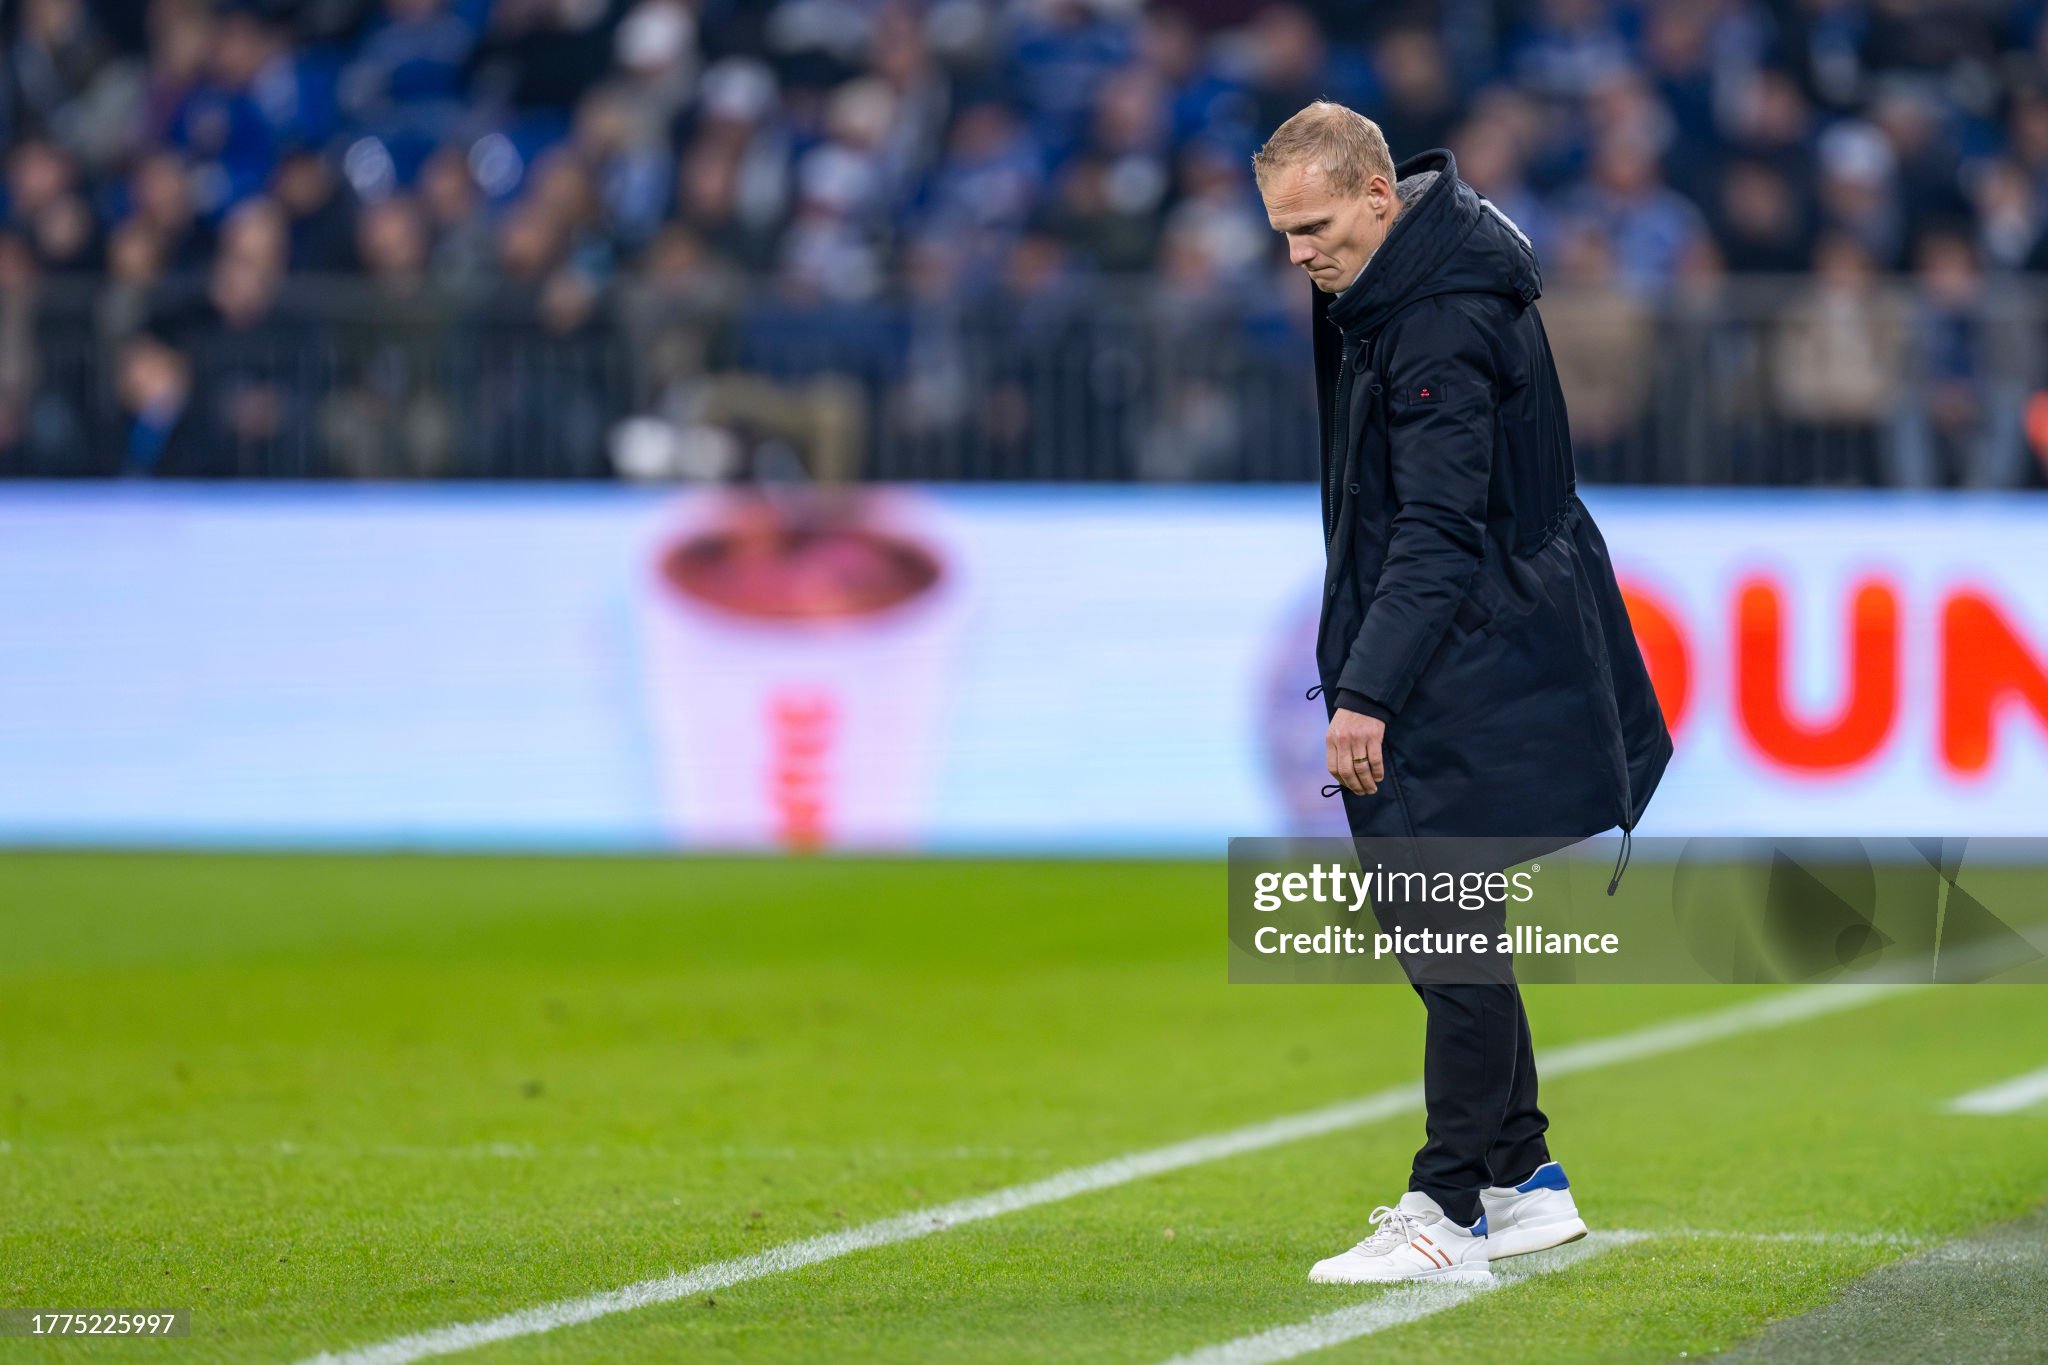 Schalke coach slams poor performance after another blow: 'Unacceptable'